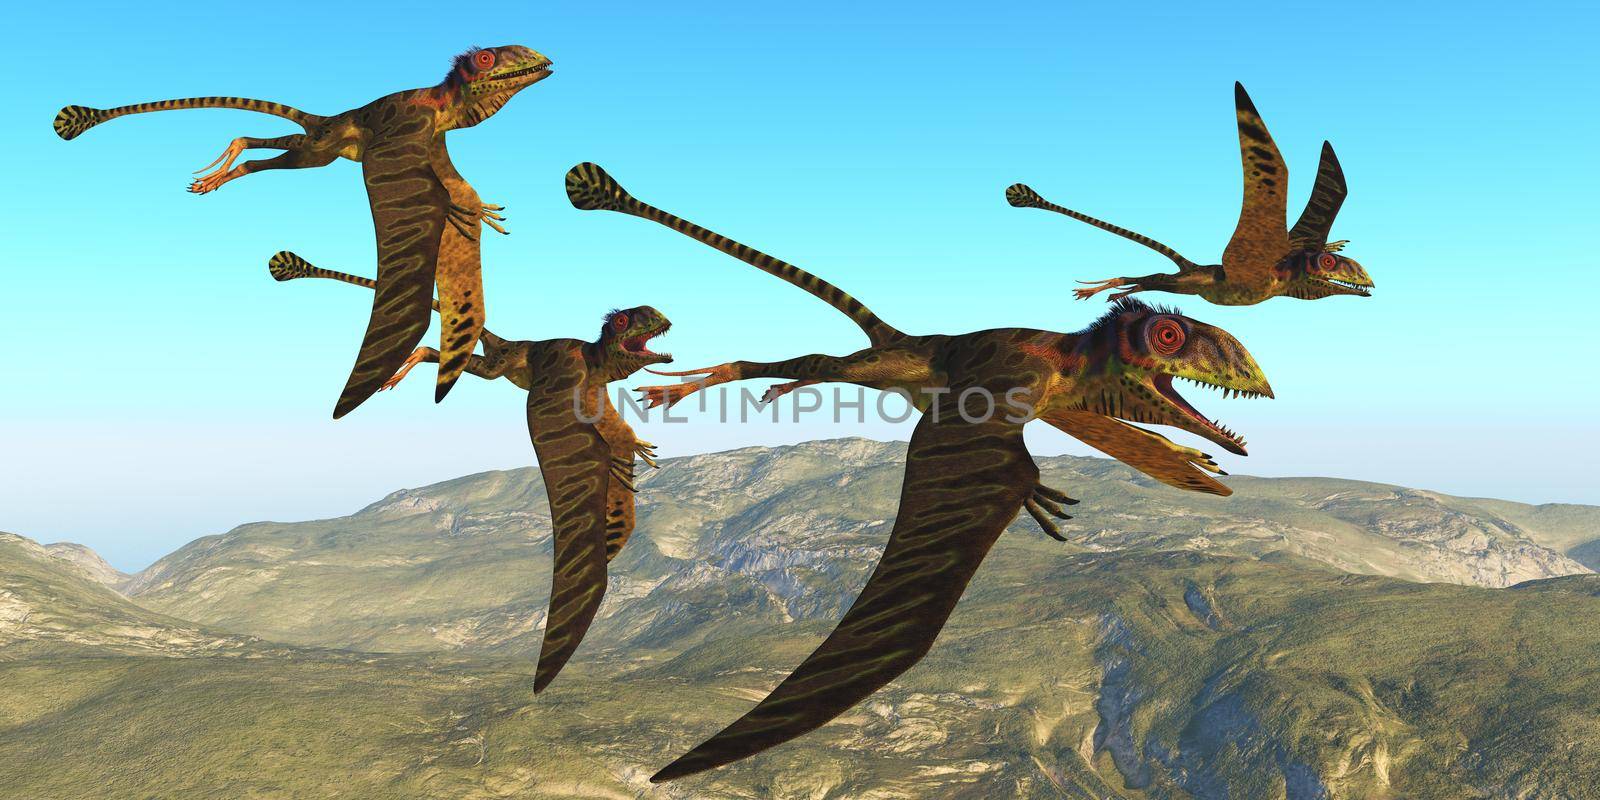 A flock of Peteinosaurus reptiles fly over a mountainous landscape during the Triassic Age of Italy.